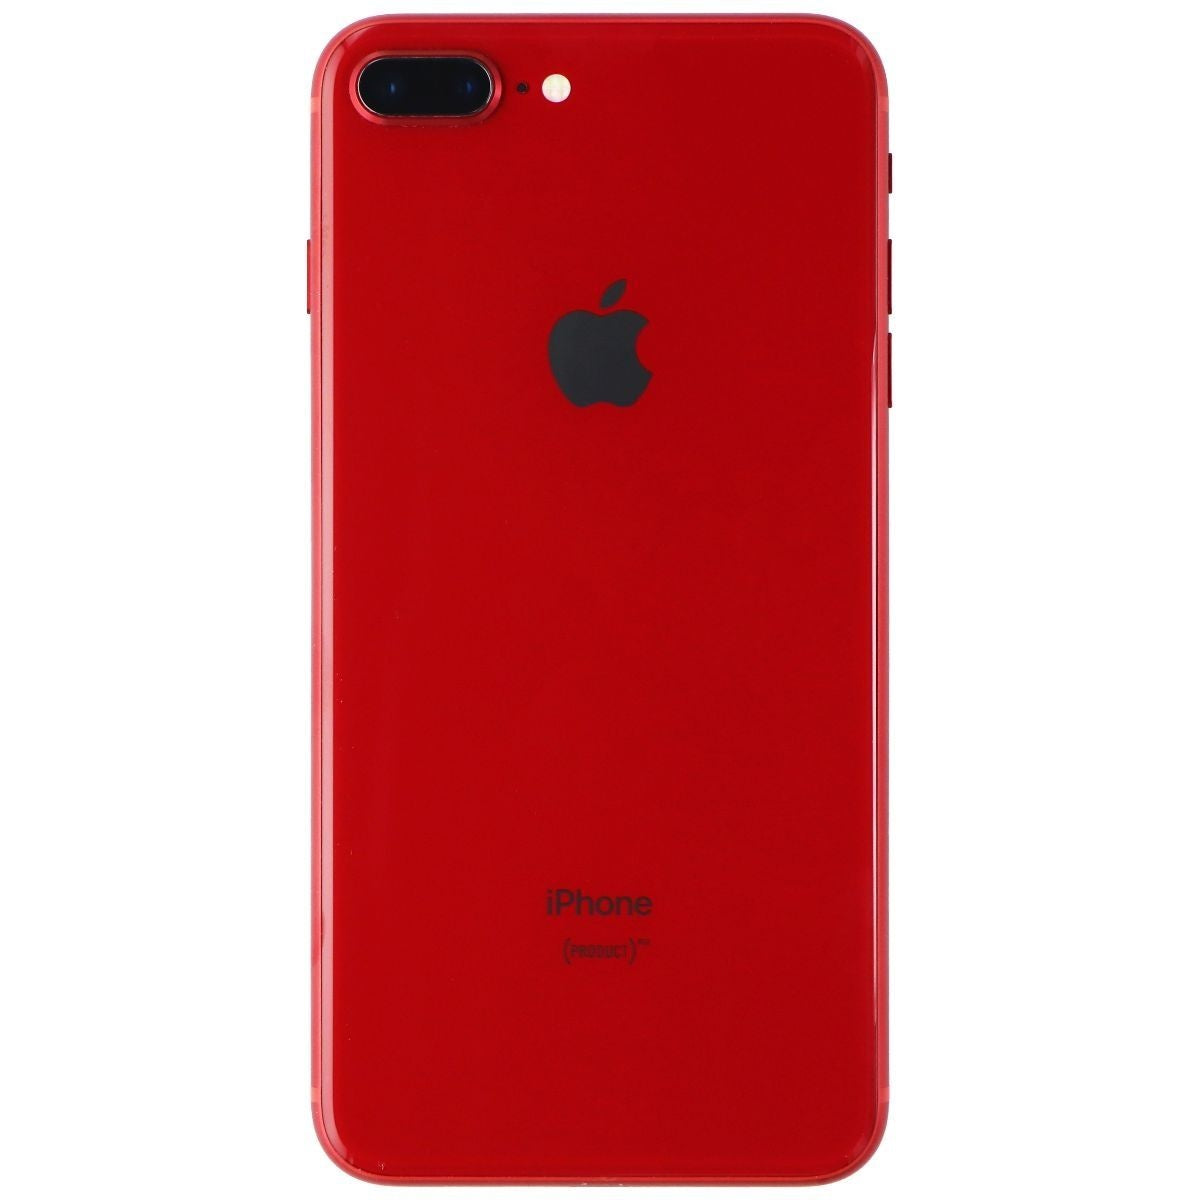 Apple iPhone 8 Plus (5.5-inch) Smartphone (A1864) T-Mobile Only - 64GB/RED Cell Phones & Smartphones Apple    - Simple Cell Bulk Wholesale Pricing - USA Seller